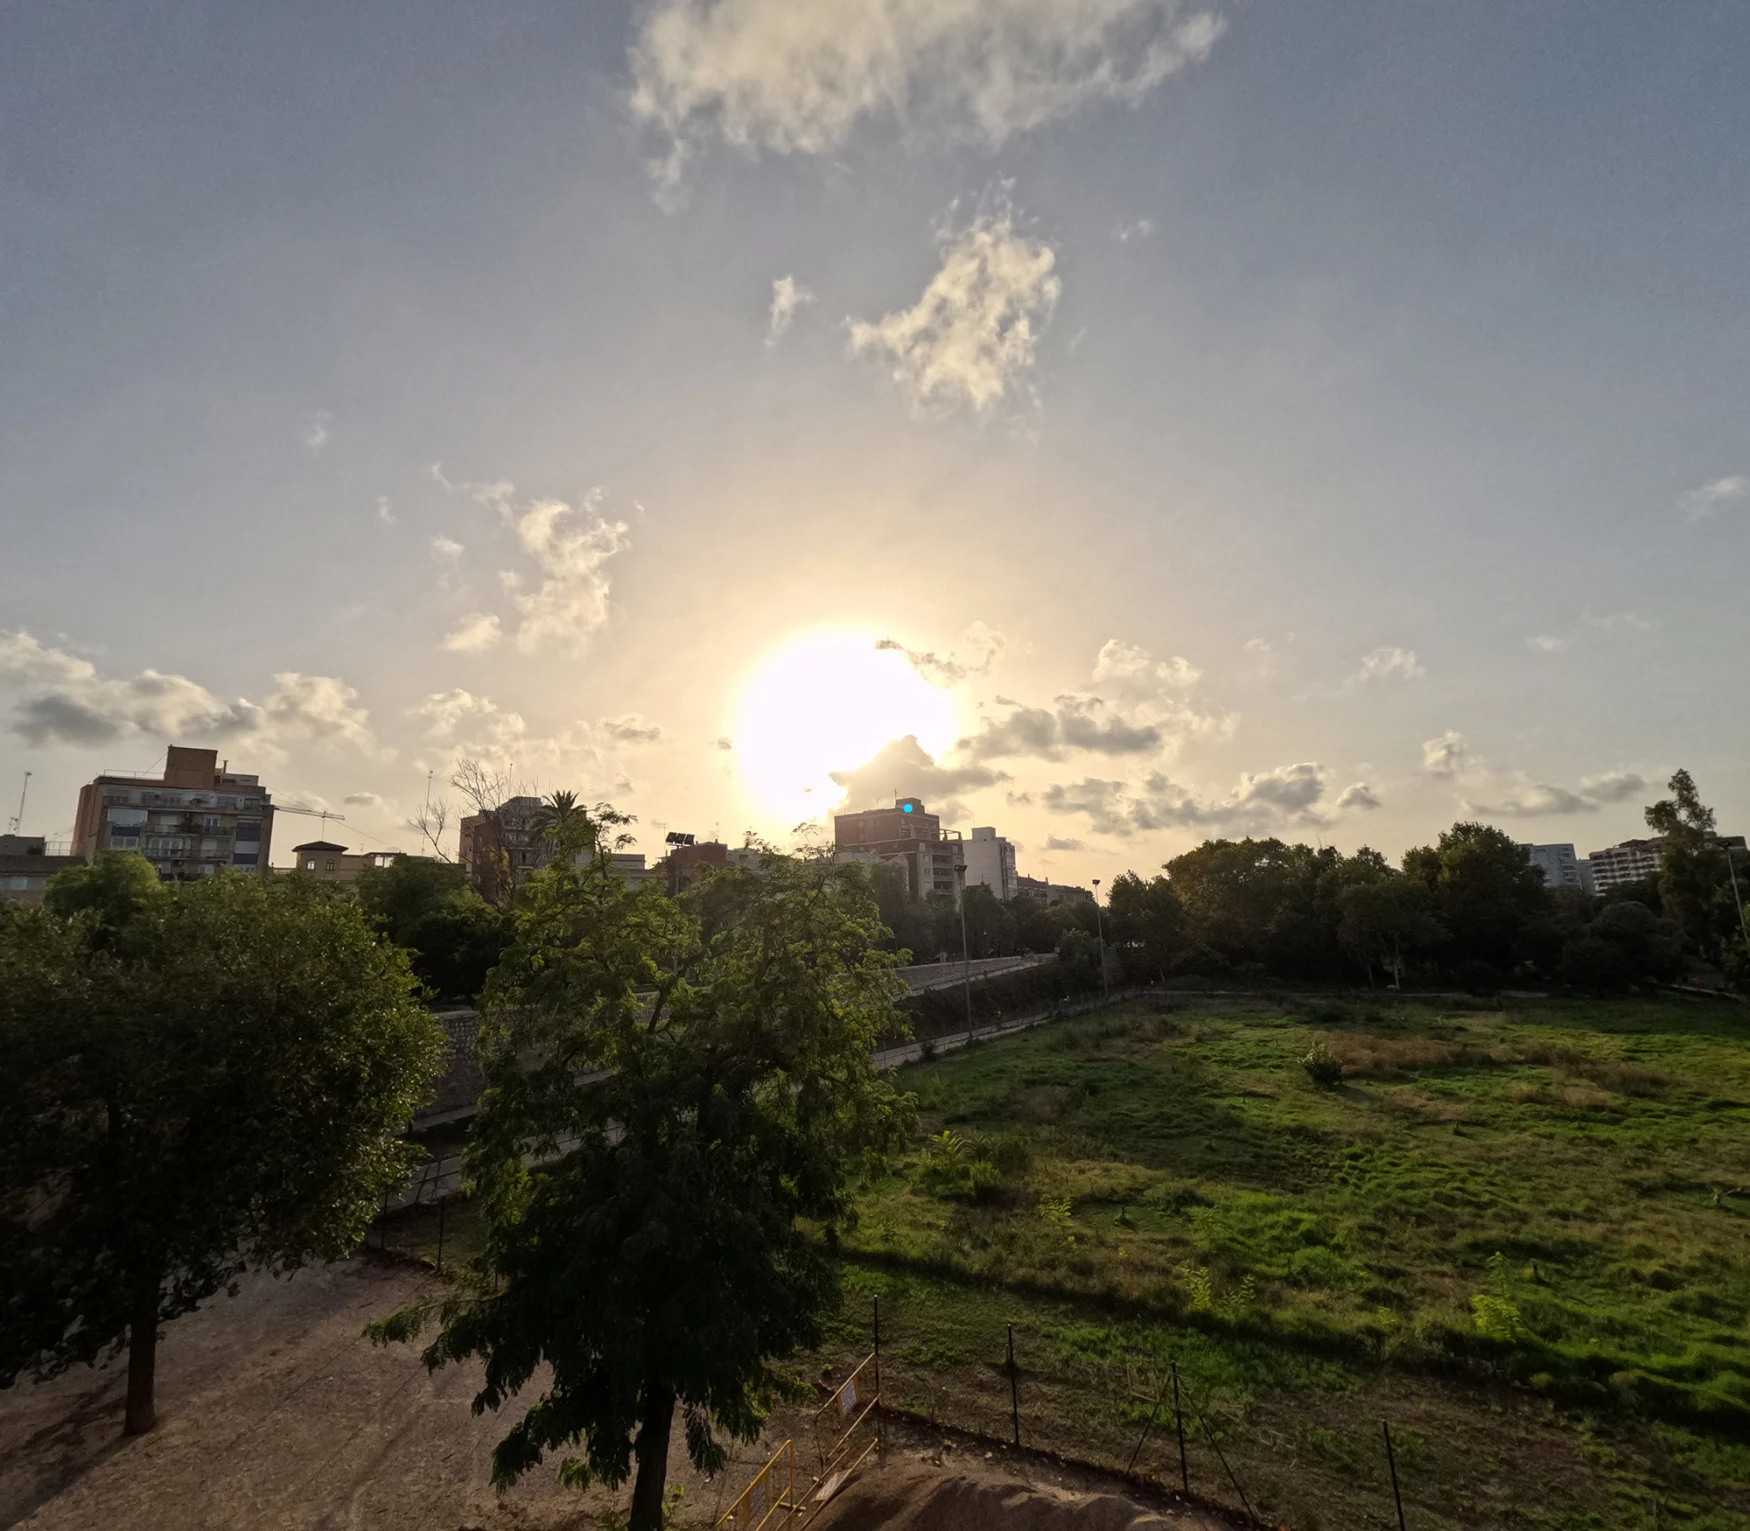 A photo of a setting sun over a park area in a city center.